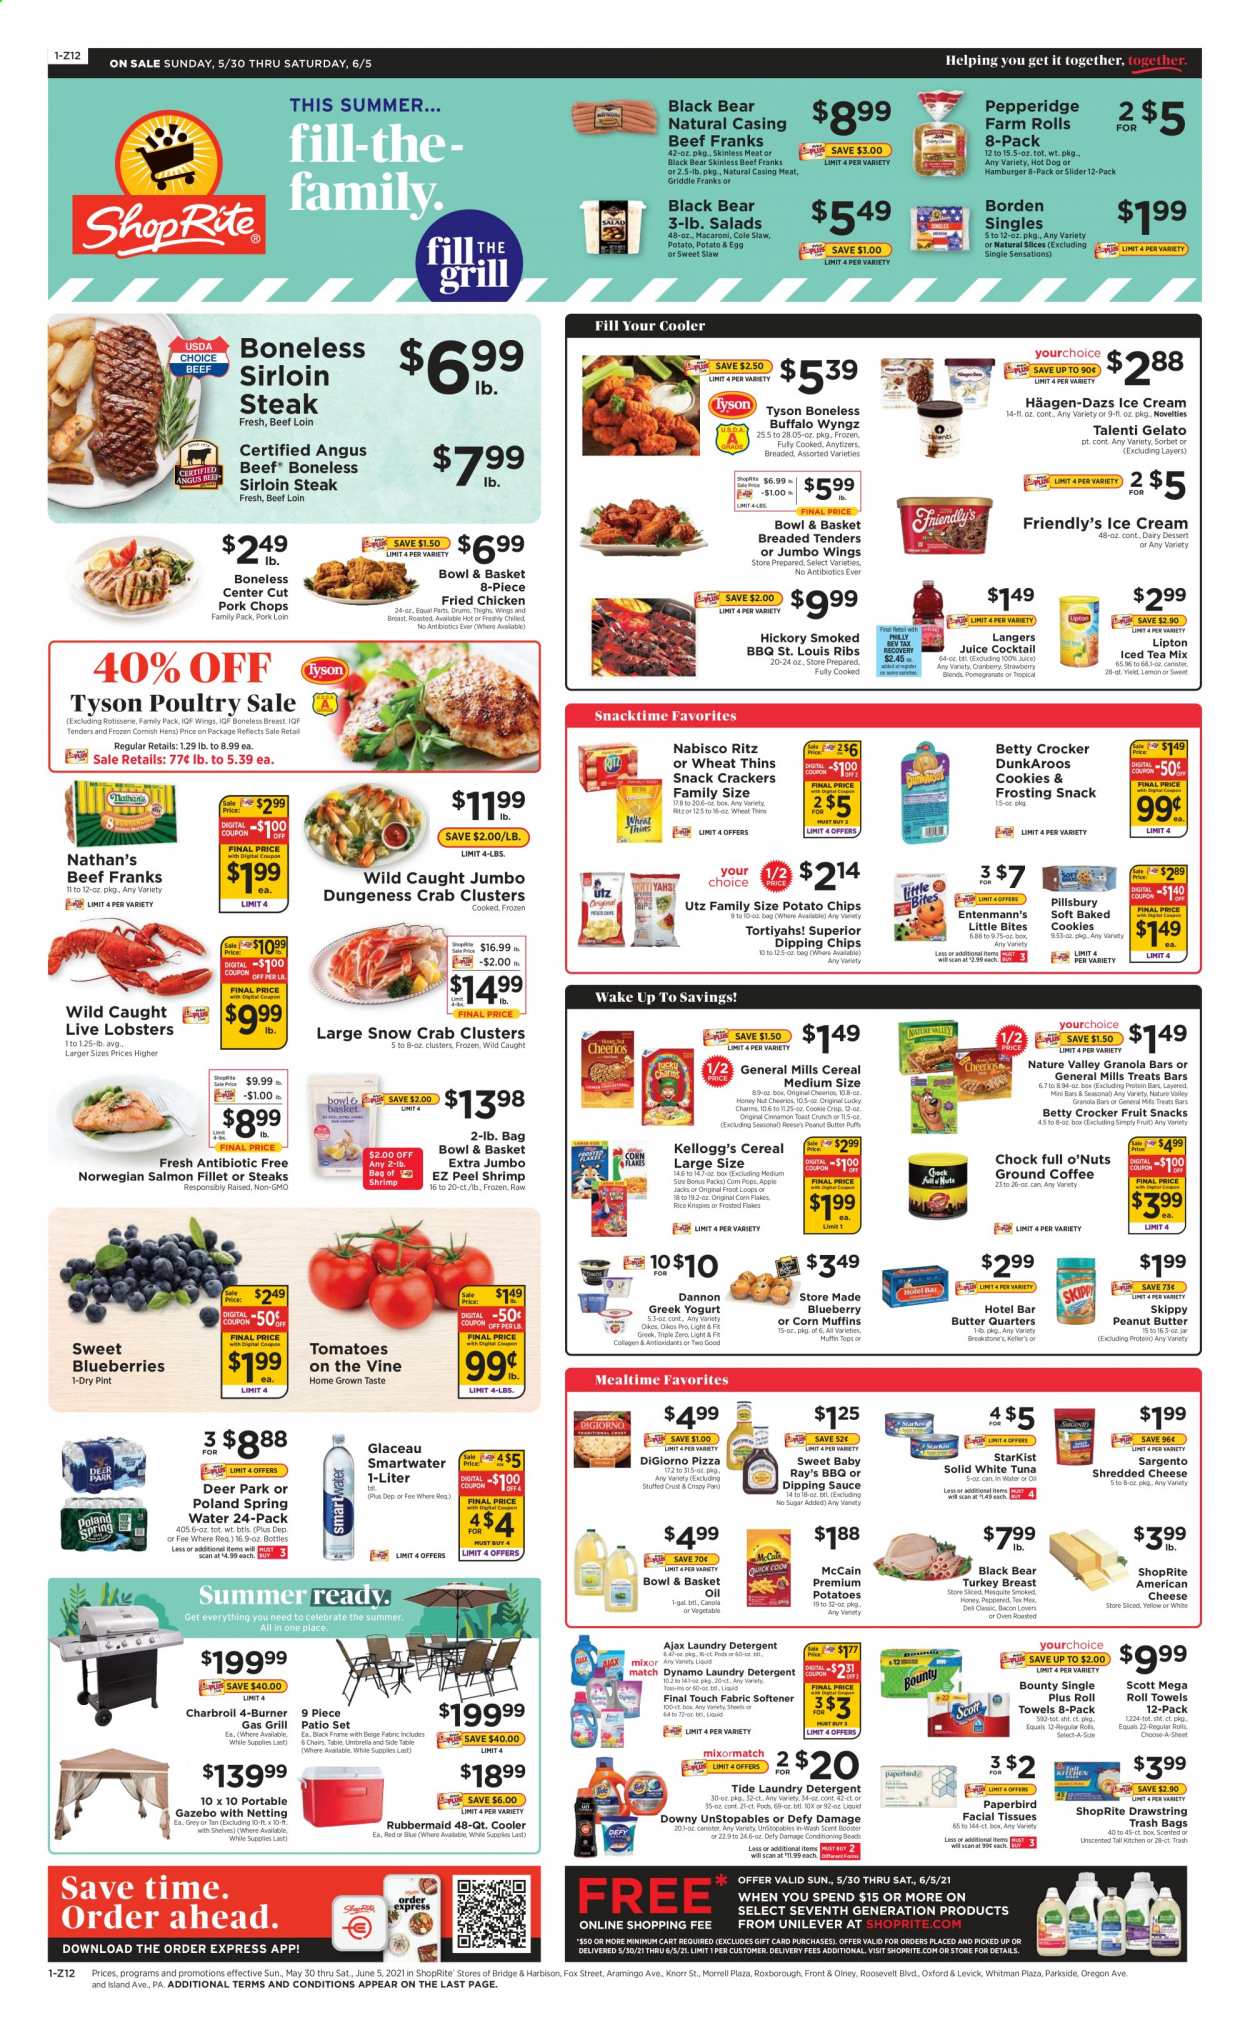 thumbnail - ShopRite Flyer - 05/30/2021 - 06/05/2021 - Sales products - Bowl & Basket, Entenmann's, tomatoes, blueberries, lobster, salmon, salmon fillet, tuna, crab, shrimps, StarKist, hot dog, pizza, macaroni, hamburger, Knorr, sauce, fried chicken, Pillsbury, bacon, american cheese, shredded cheese, Sargento, greek yoghurt, yoghurt, Oikos, Dannon, eggs, ice cream, Reese's, Häagen-Dazs, Talenti Gelato, Friendly's Ice Cream, gelato, McCain, cookies, Bounty, crackers, Kellogg's, fruit snack, Little Bites, RITZ, potato chips, Snacktime, Thins, frosting, cereals, Cheerios, corn flakes, protein bar, granola bar, Rice Krispies, Frosted Flakes, Corn Pops, Nature Valley, cinnamon, peanut butter, juice, Lipton, ice tea, spring water, Smartwater, turkey breast, beef meat, beef sirloin, steak, sirloin steak, pork chops, pork loin, pork meat, tissues, paper towels, detergent, Ajax, Tide, Unstopables, fabric softener, laundry detergent, conditioning beads, facial tissues, trash bags, pan, Scott, pomegranate. Page 1.